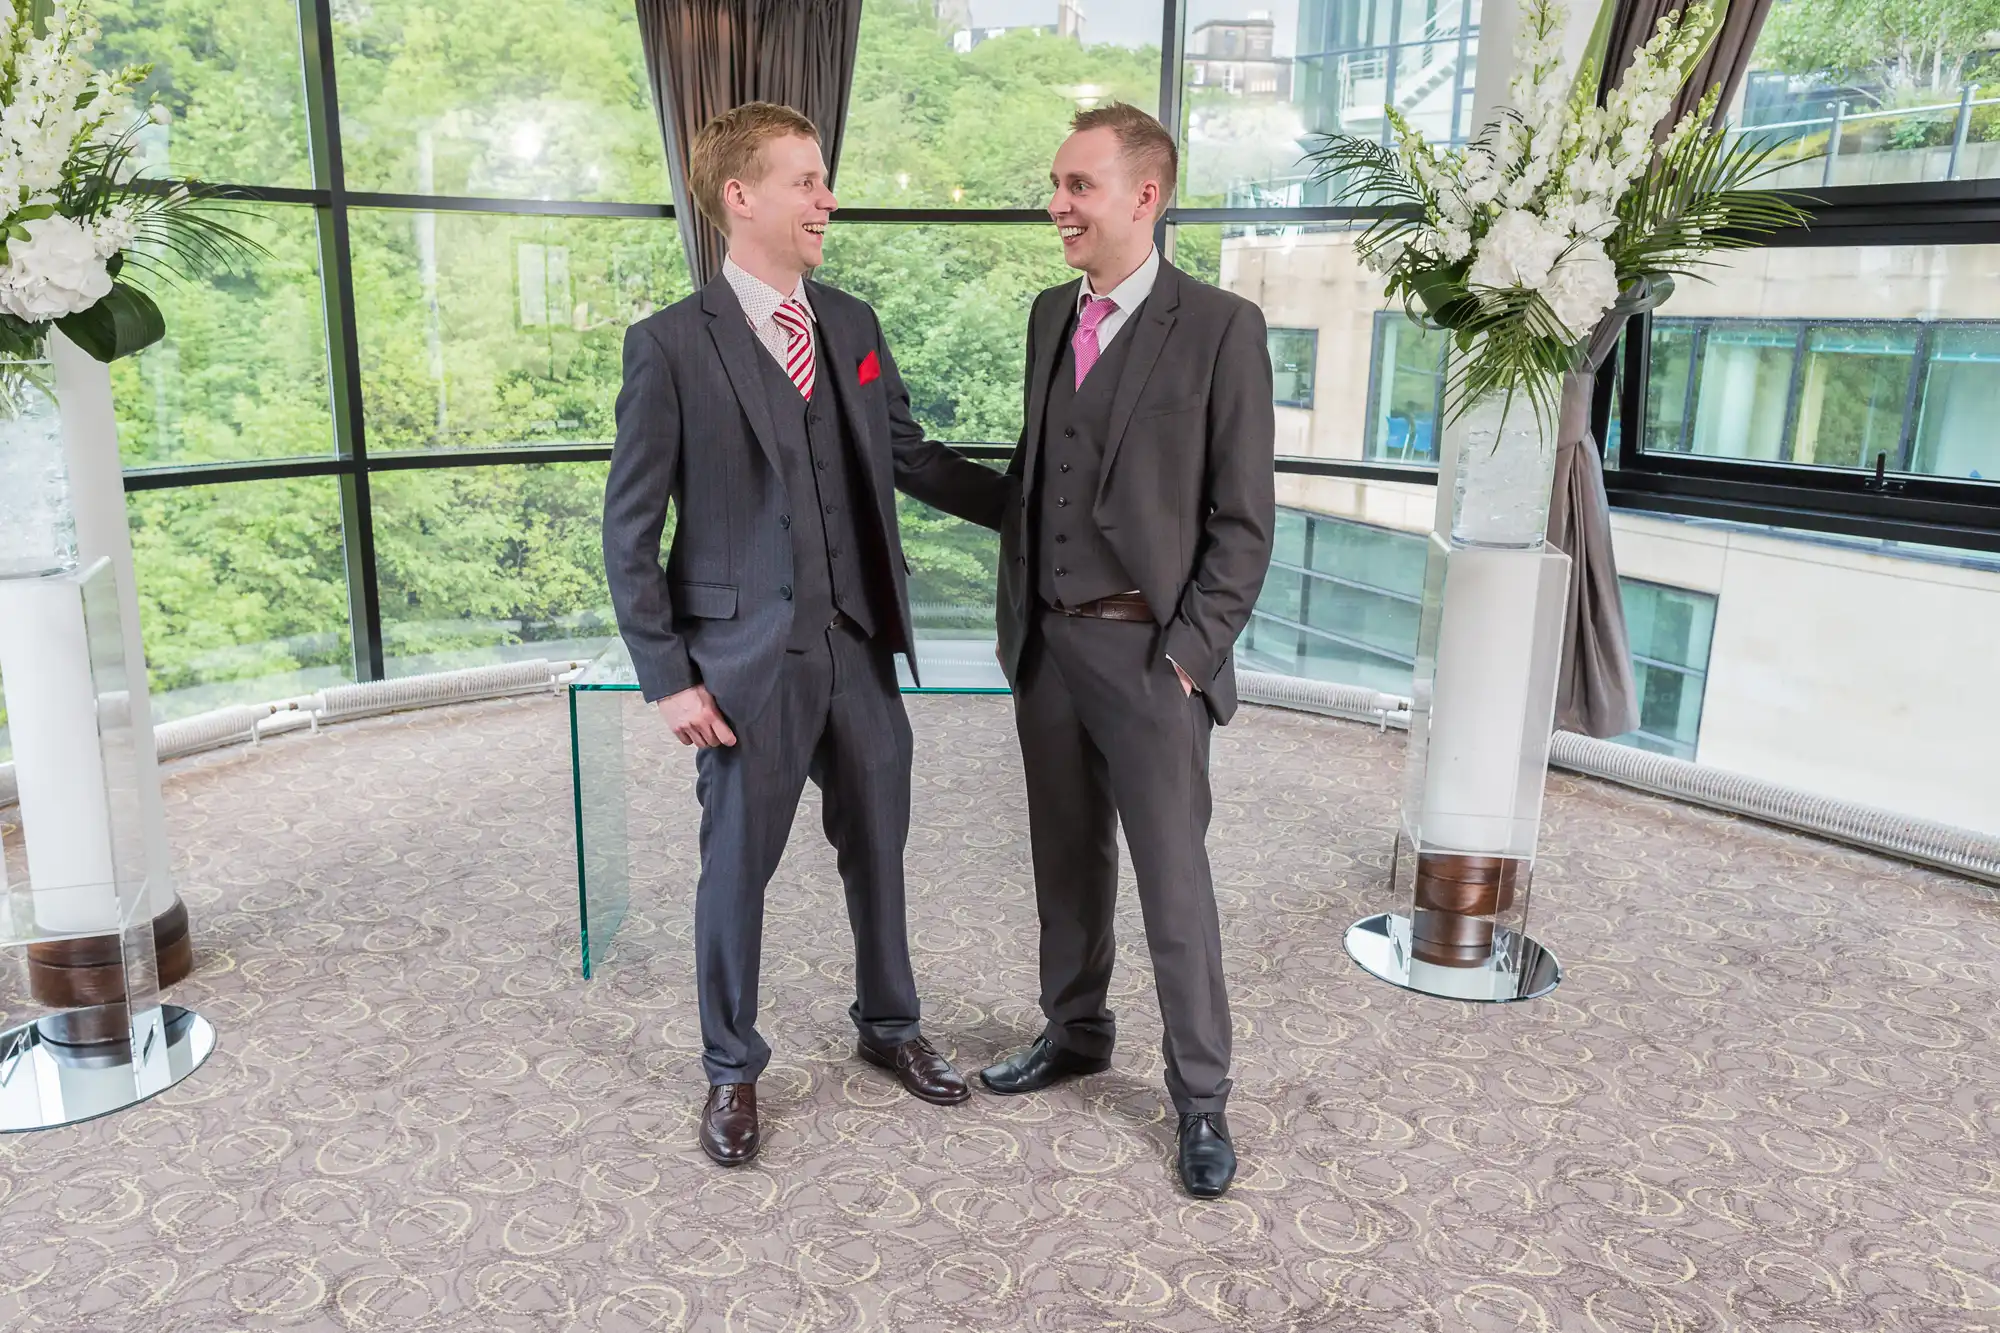 Two men smiling and holding hands at a wedding ceremony indoors, with large windows and greenery outside.